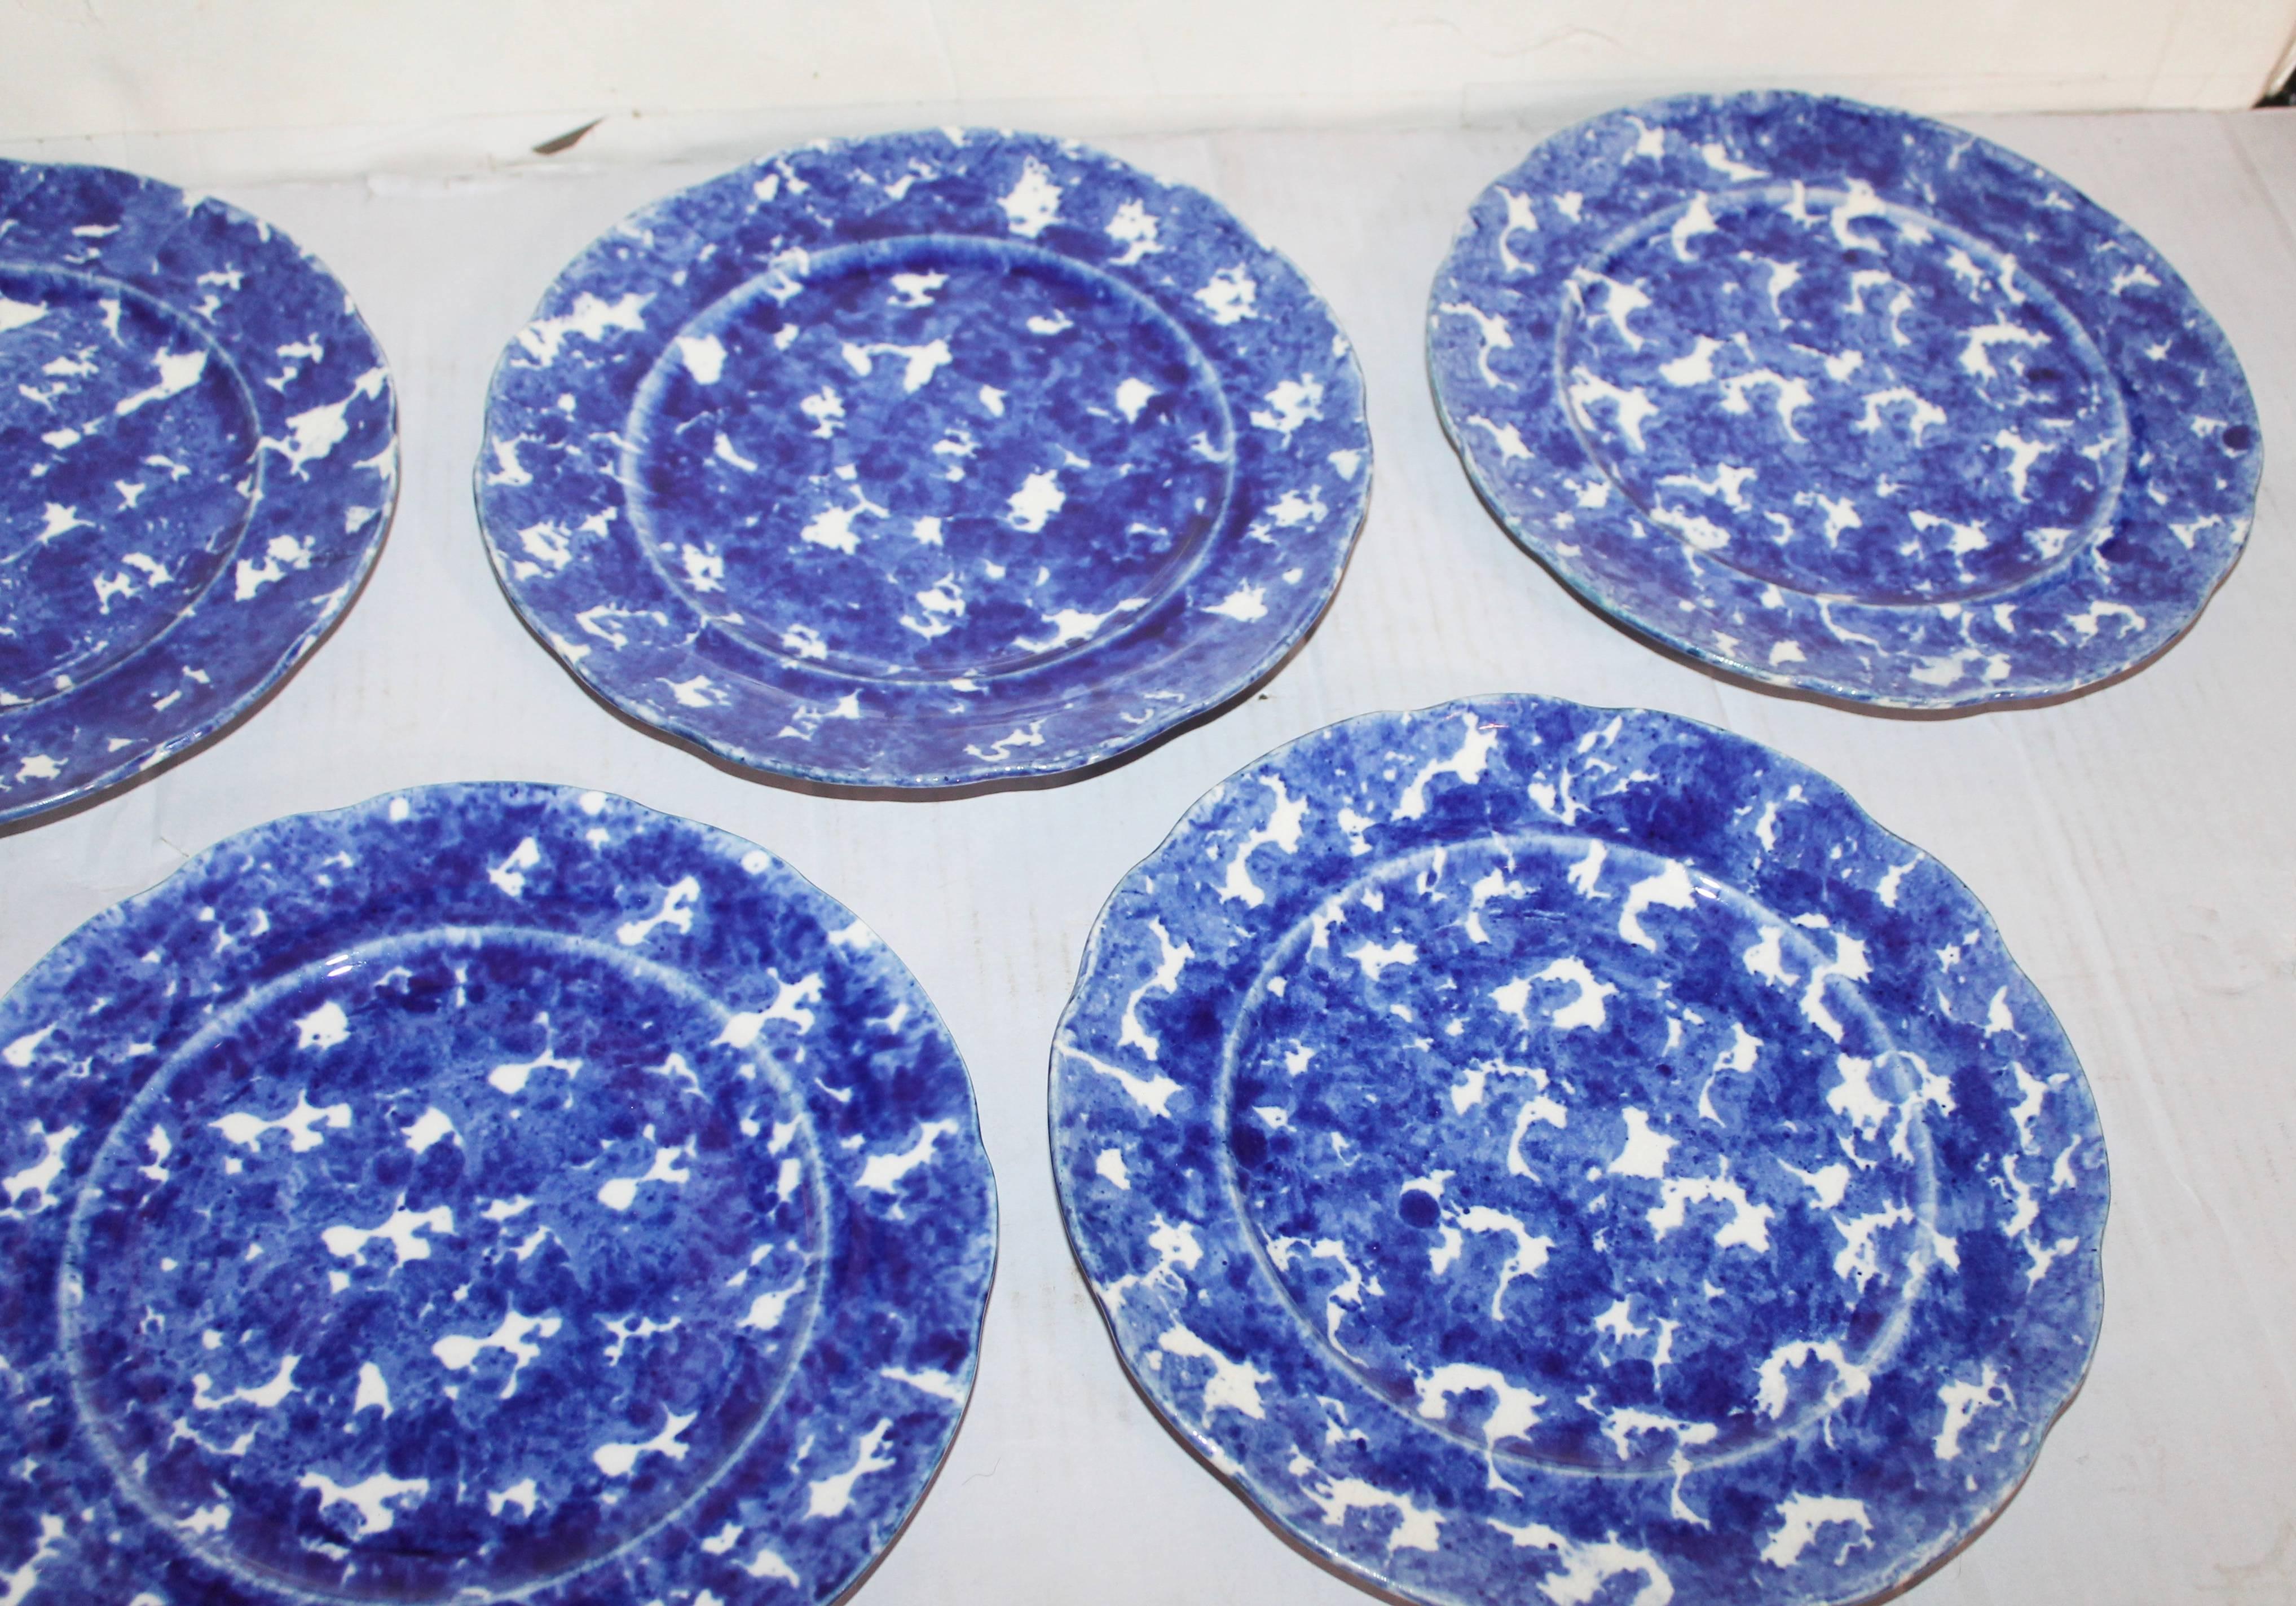 Country Set of Six Matching 19th Century Sponge Ware Dinner Plates